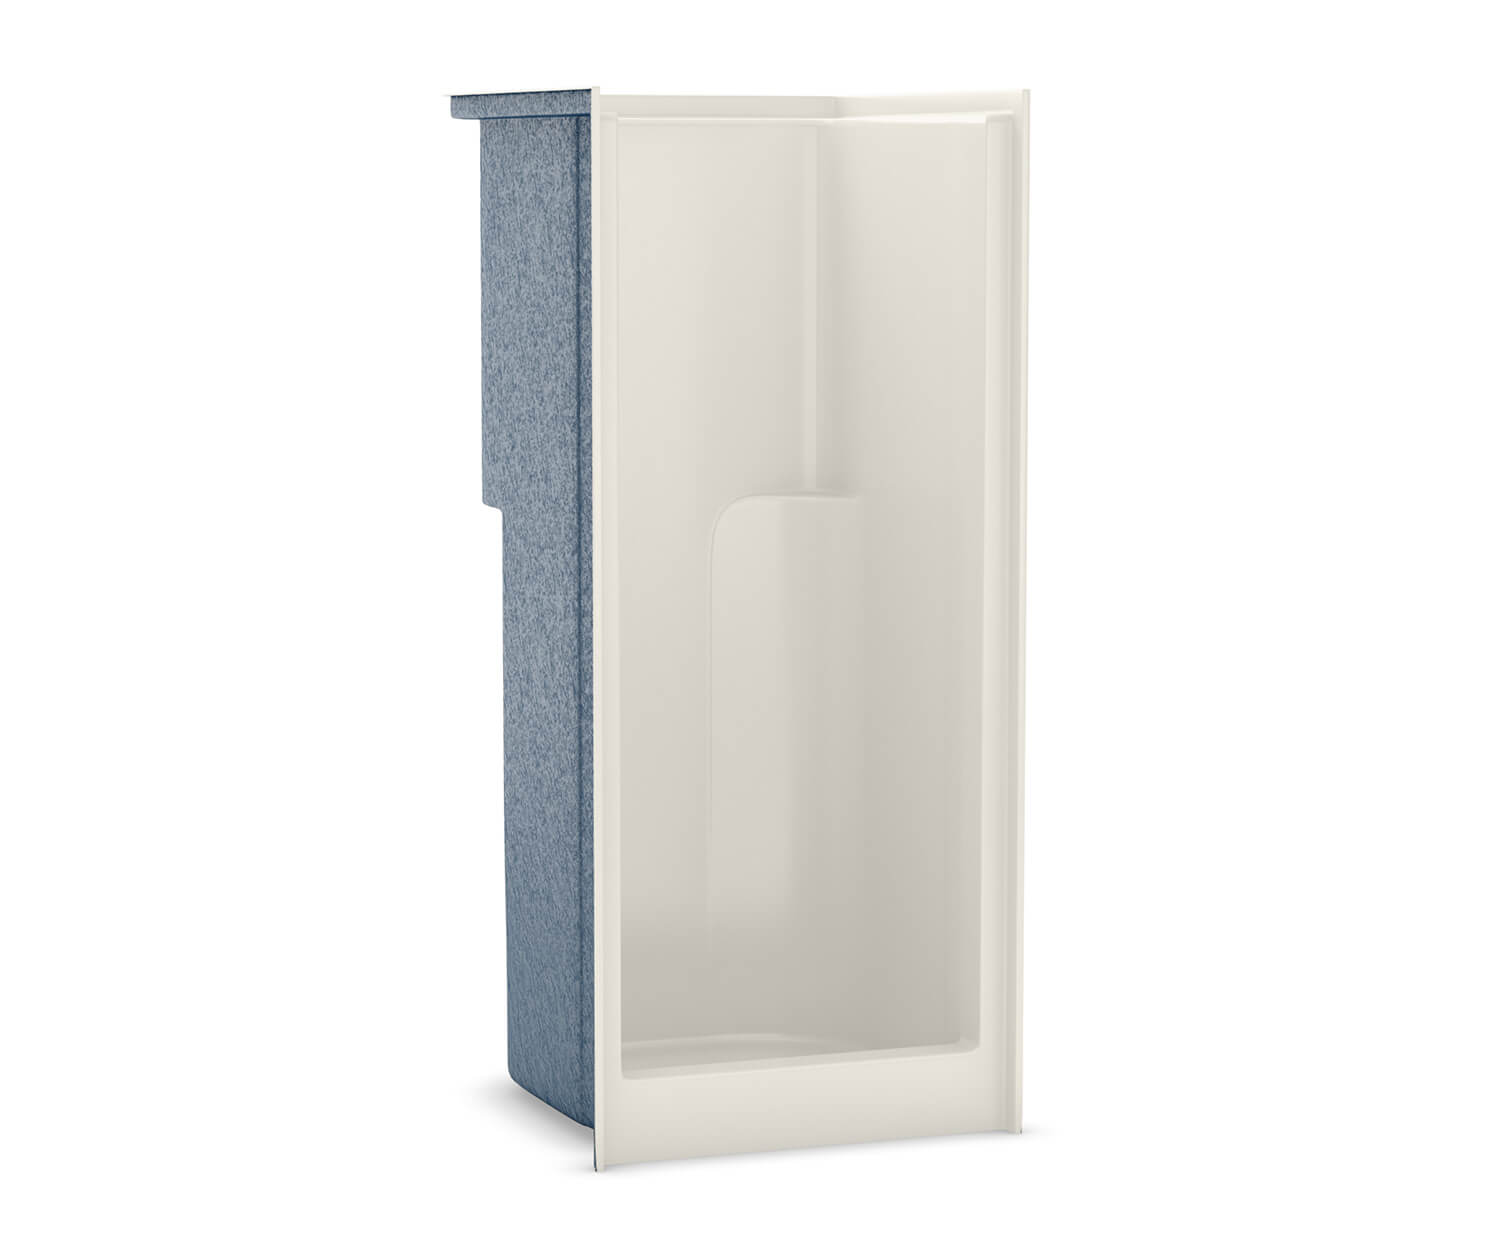 S-32 AcrylX Alcove Center Drain One-Piece Shower in Sterling 